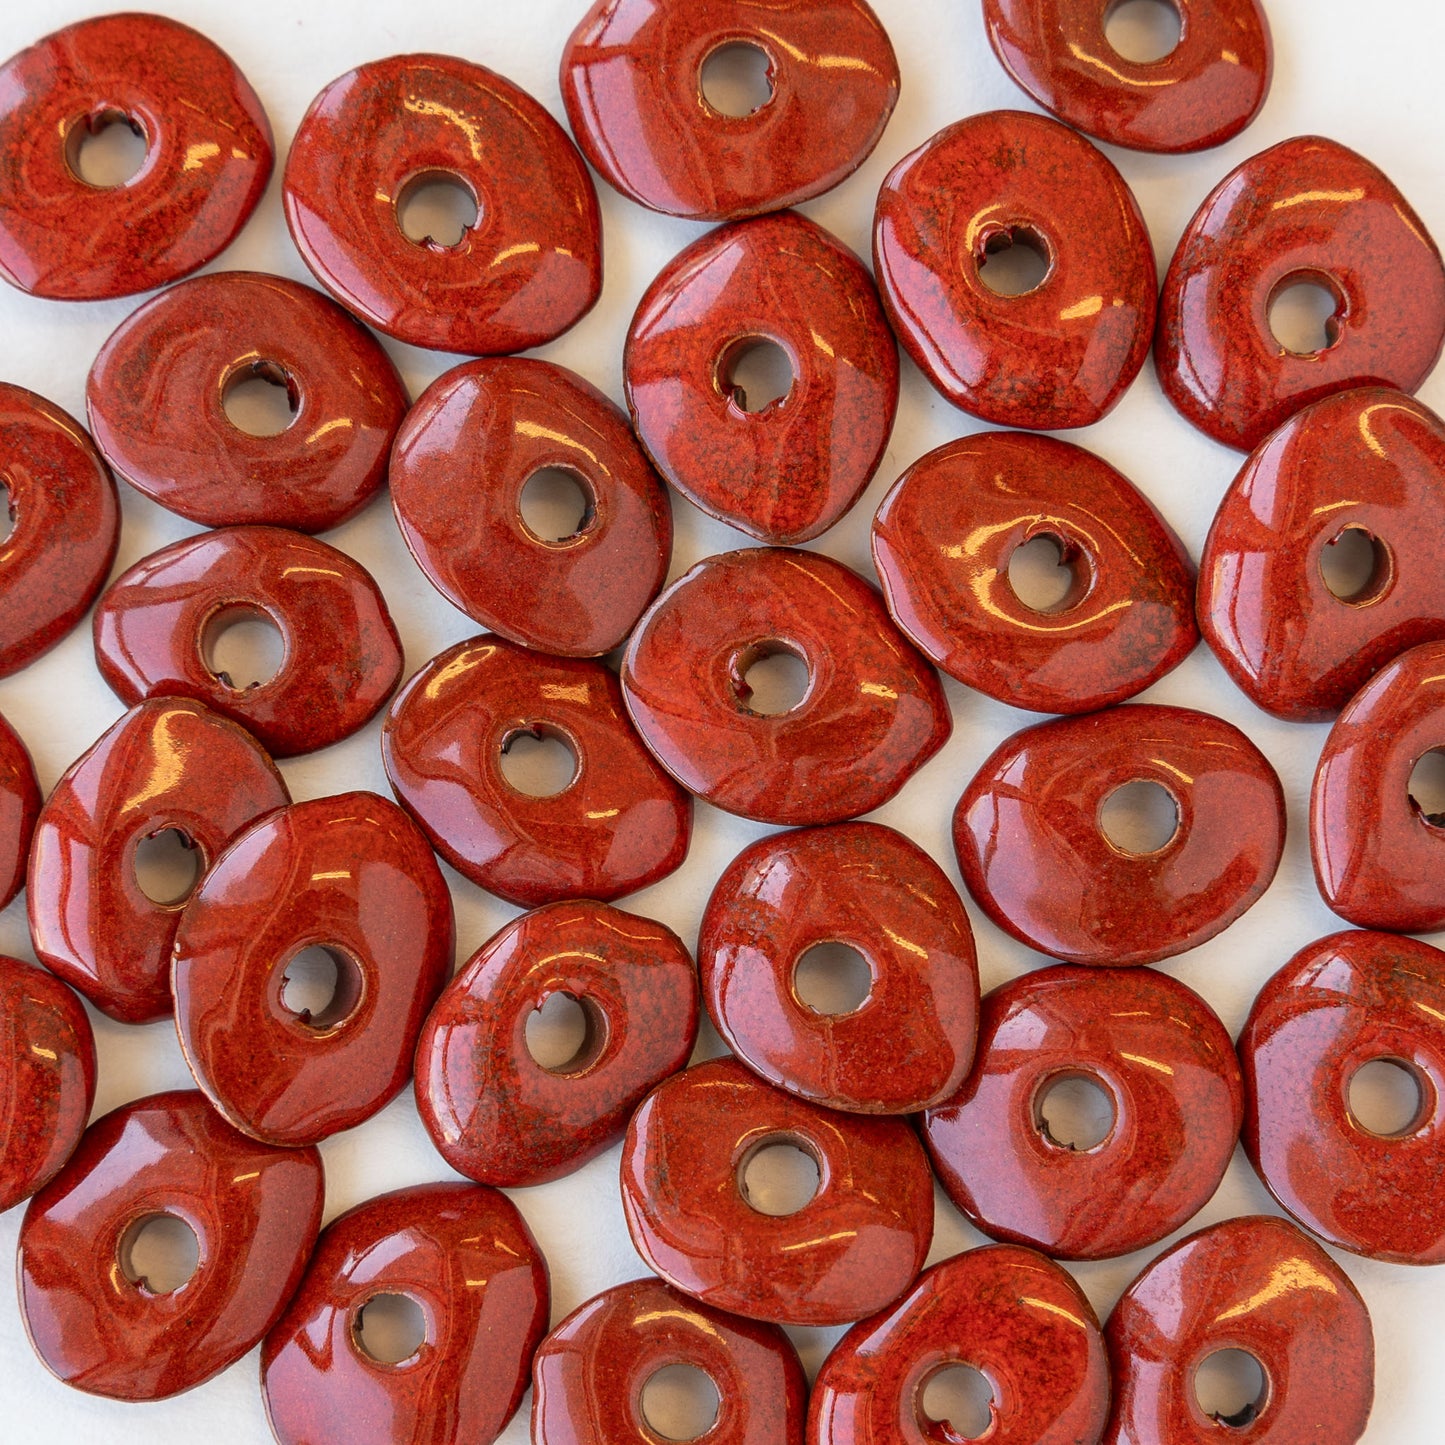 Load image into Gallery viewer, 13-18mm Shiny Glazed Ceramic Disk Beads - Crimson Red - 10 or 30
